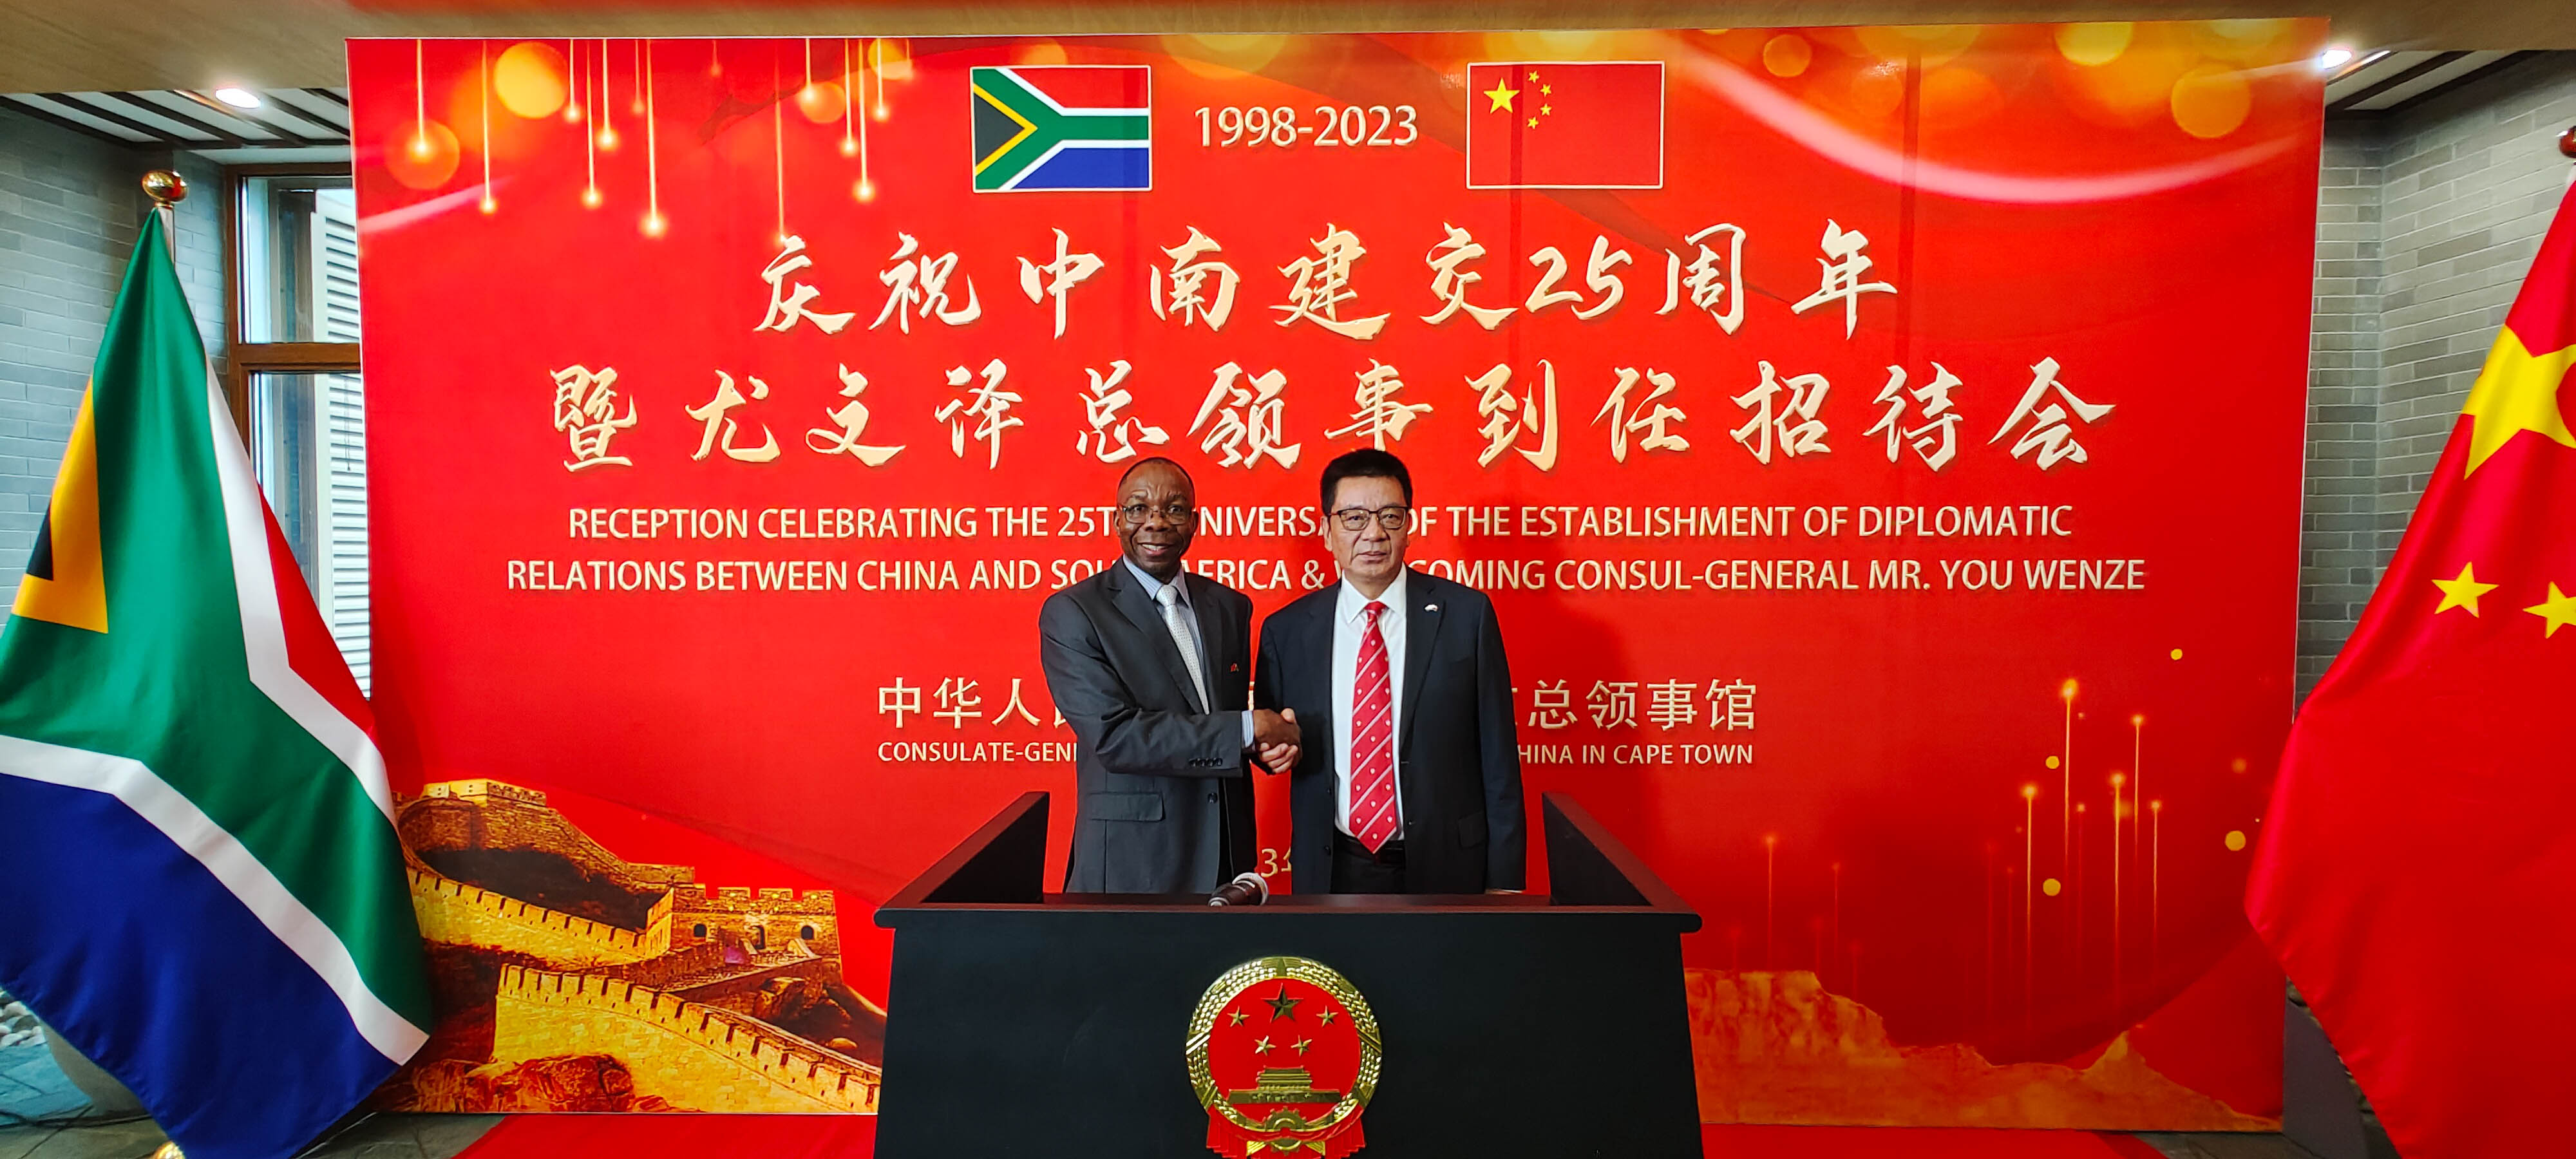 The Director of CIRU shakes hands with the new Consul General of the People's Republic of China, in Cape Town. 